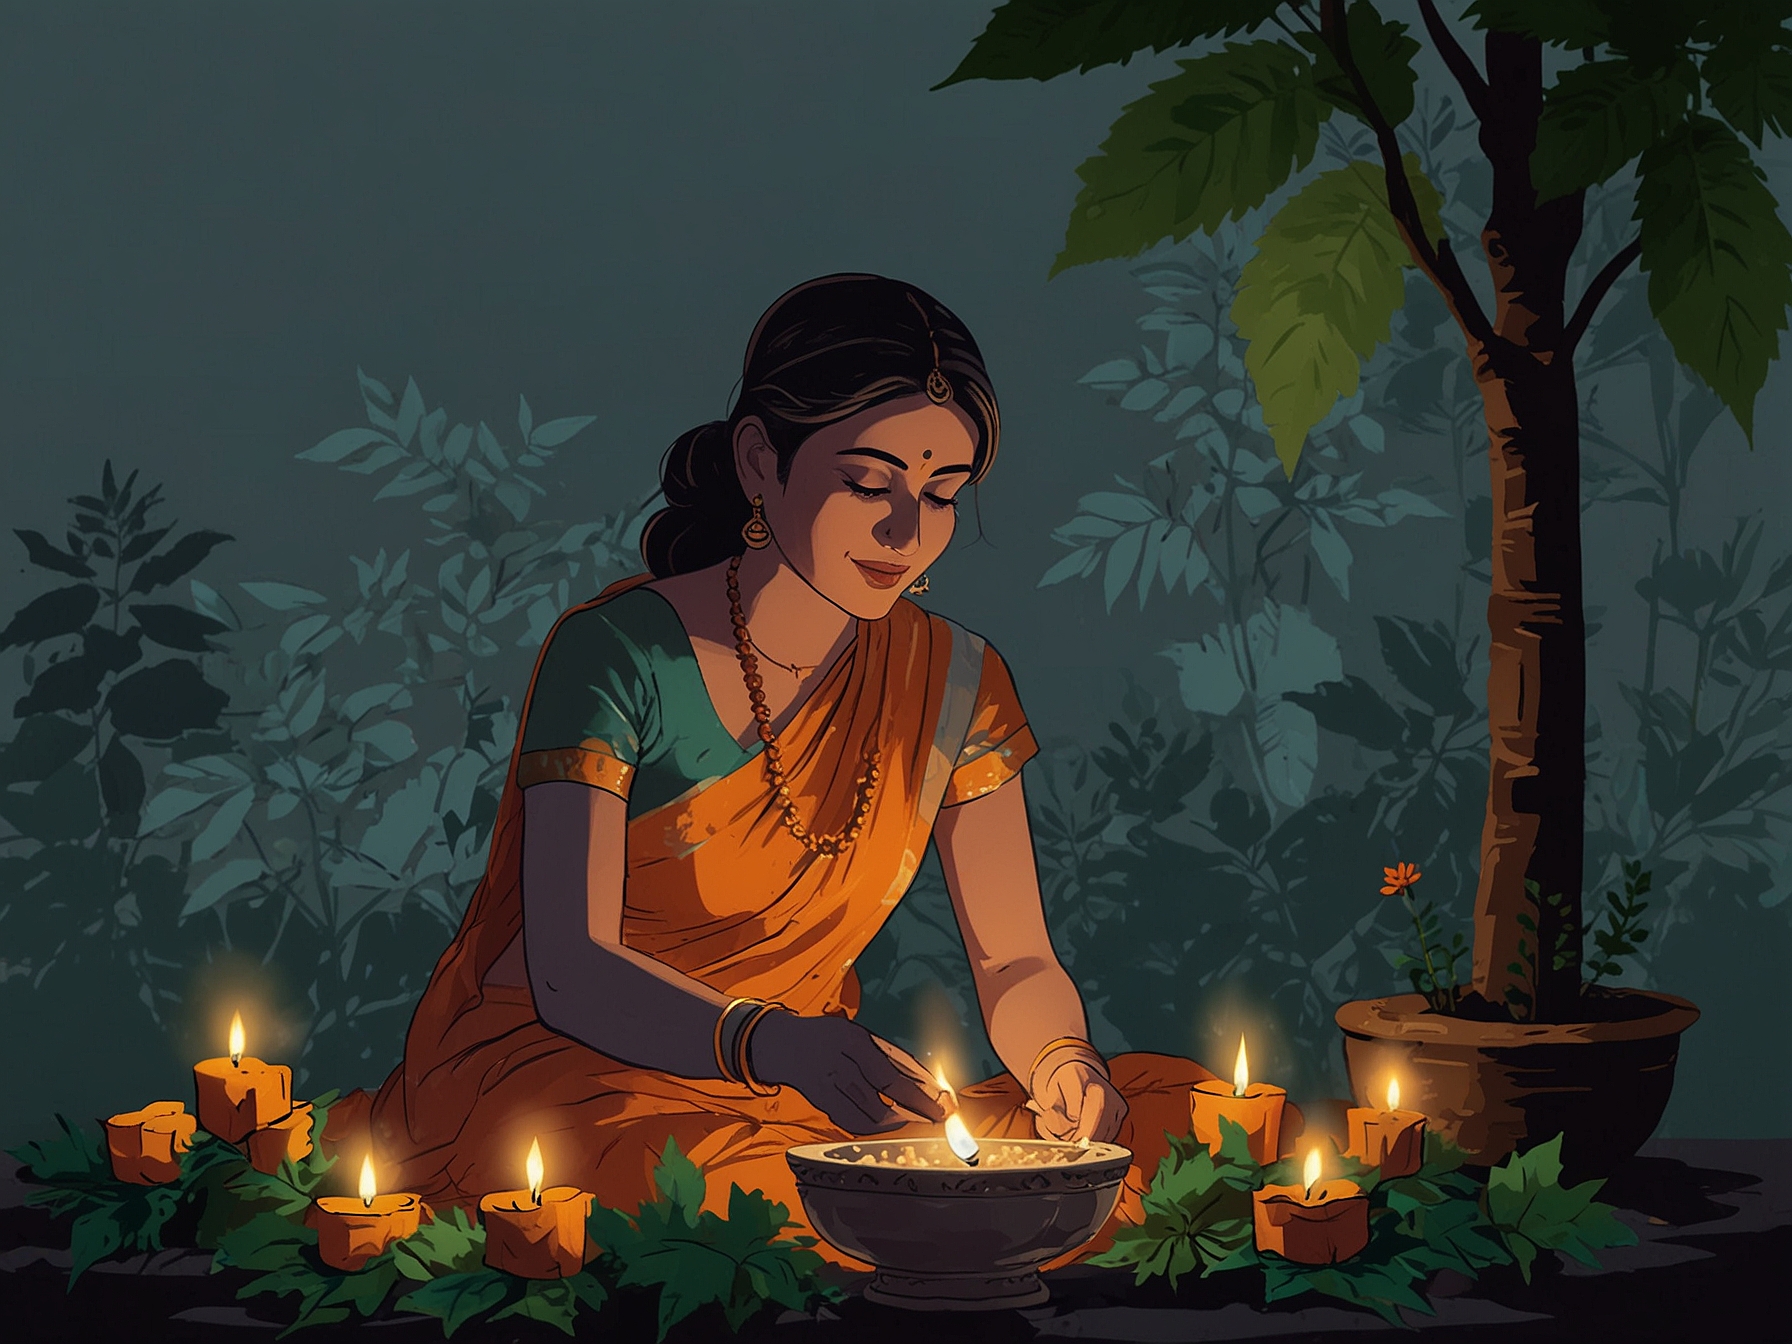 A devotee lighting a diya in front of a Tulsi plant during Nirjala Ekadashi, symbolizing the dispelling of financial darkness and inviting prosperity into the home.